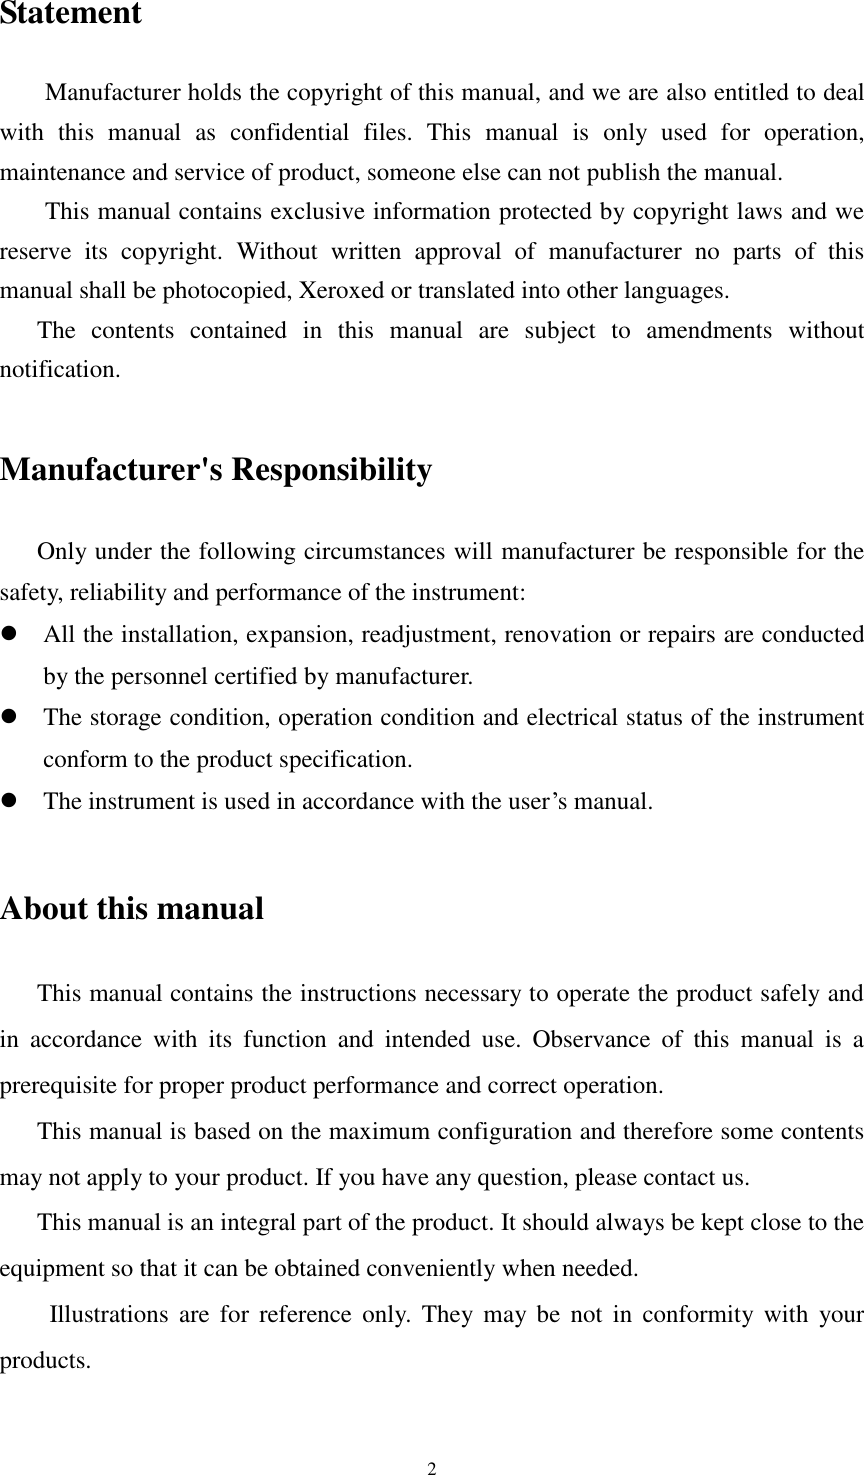 2 Statement Manufacturer holds the copyright of this manual, and we are also entitled to deal with  this  manual  as  confidential  files.  This  manual  is  only  used  for  operation, maintenance and service of product, someone else can not publish the manual. This manual contains exclusive information protected by copyright laws and we reserve  its  copyright.  Without  written  approval  of  manufacturer  no  parts  of  this manual shall be photocopied, Xeroxed or translated into other languages. The  contents  contained  in  this  manual  are  subject  to  amendments  without notification.  Manufacturer&apos;s Responsibility Only under the following circumstances will manufacturer be responsible for the safety, reliability and performance of the instrument:  All the installation, expansion, readjustment, renovation or repairs are conducted by the personnel certified by manufacturer.  The storage condition, operation condition and electrical status of the instrument conform to the product specification.  The instrument is used in accordance with the user’s manual.  About this manual This manual contains the instructions necessary to operate the product safely and in  accordance  with  its  function  and  intended  use.  Observance  of  this  manual  is  a prerequisite for proper product performance and correct operation.    This manual is based on the maximum configuration and therefore some contents may not apply to your product. If you have any question, please contact us.    This manual is an integral part of the product. It should always be kept close to the equipment so that it can be obtained conveniently when needed. Illustrations  are  for  reference  only.  They may  be  not  in conformity with  your products.  